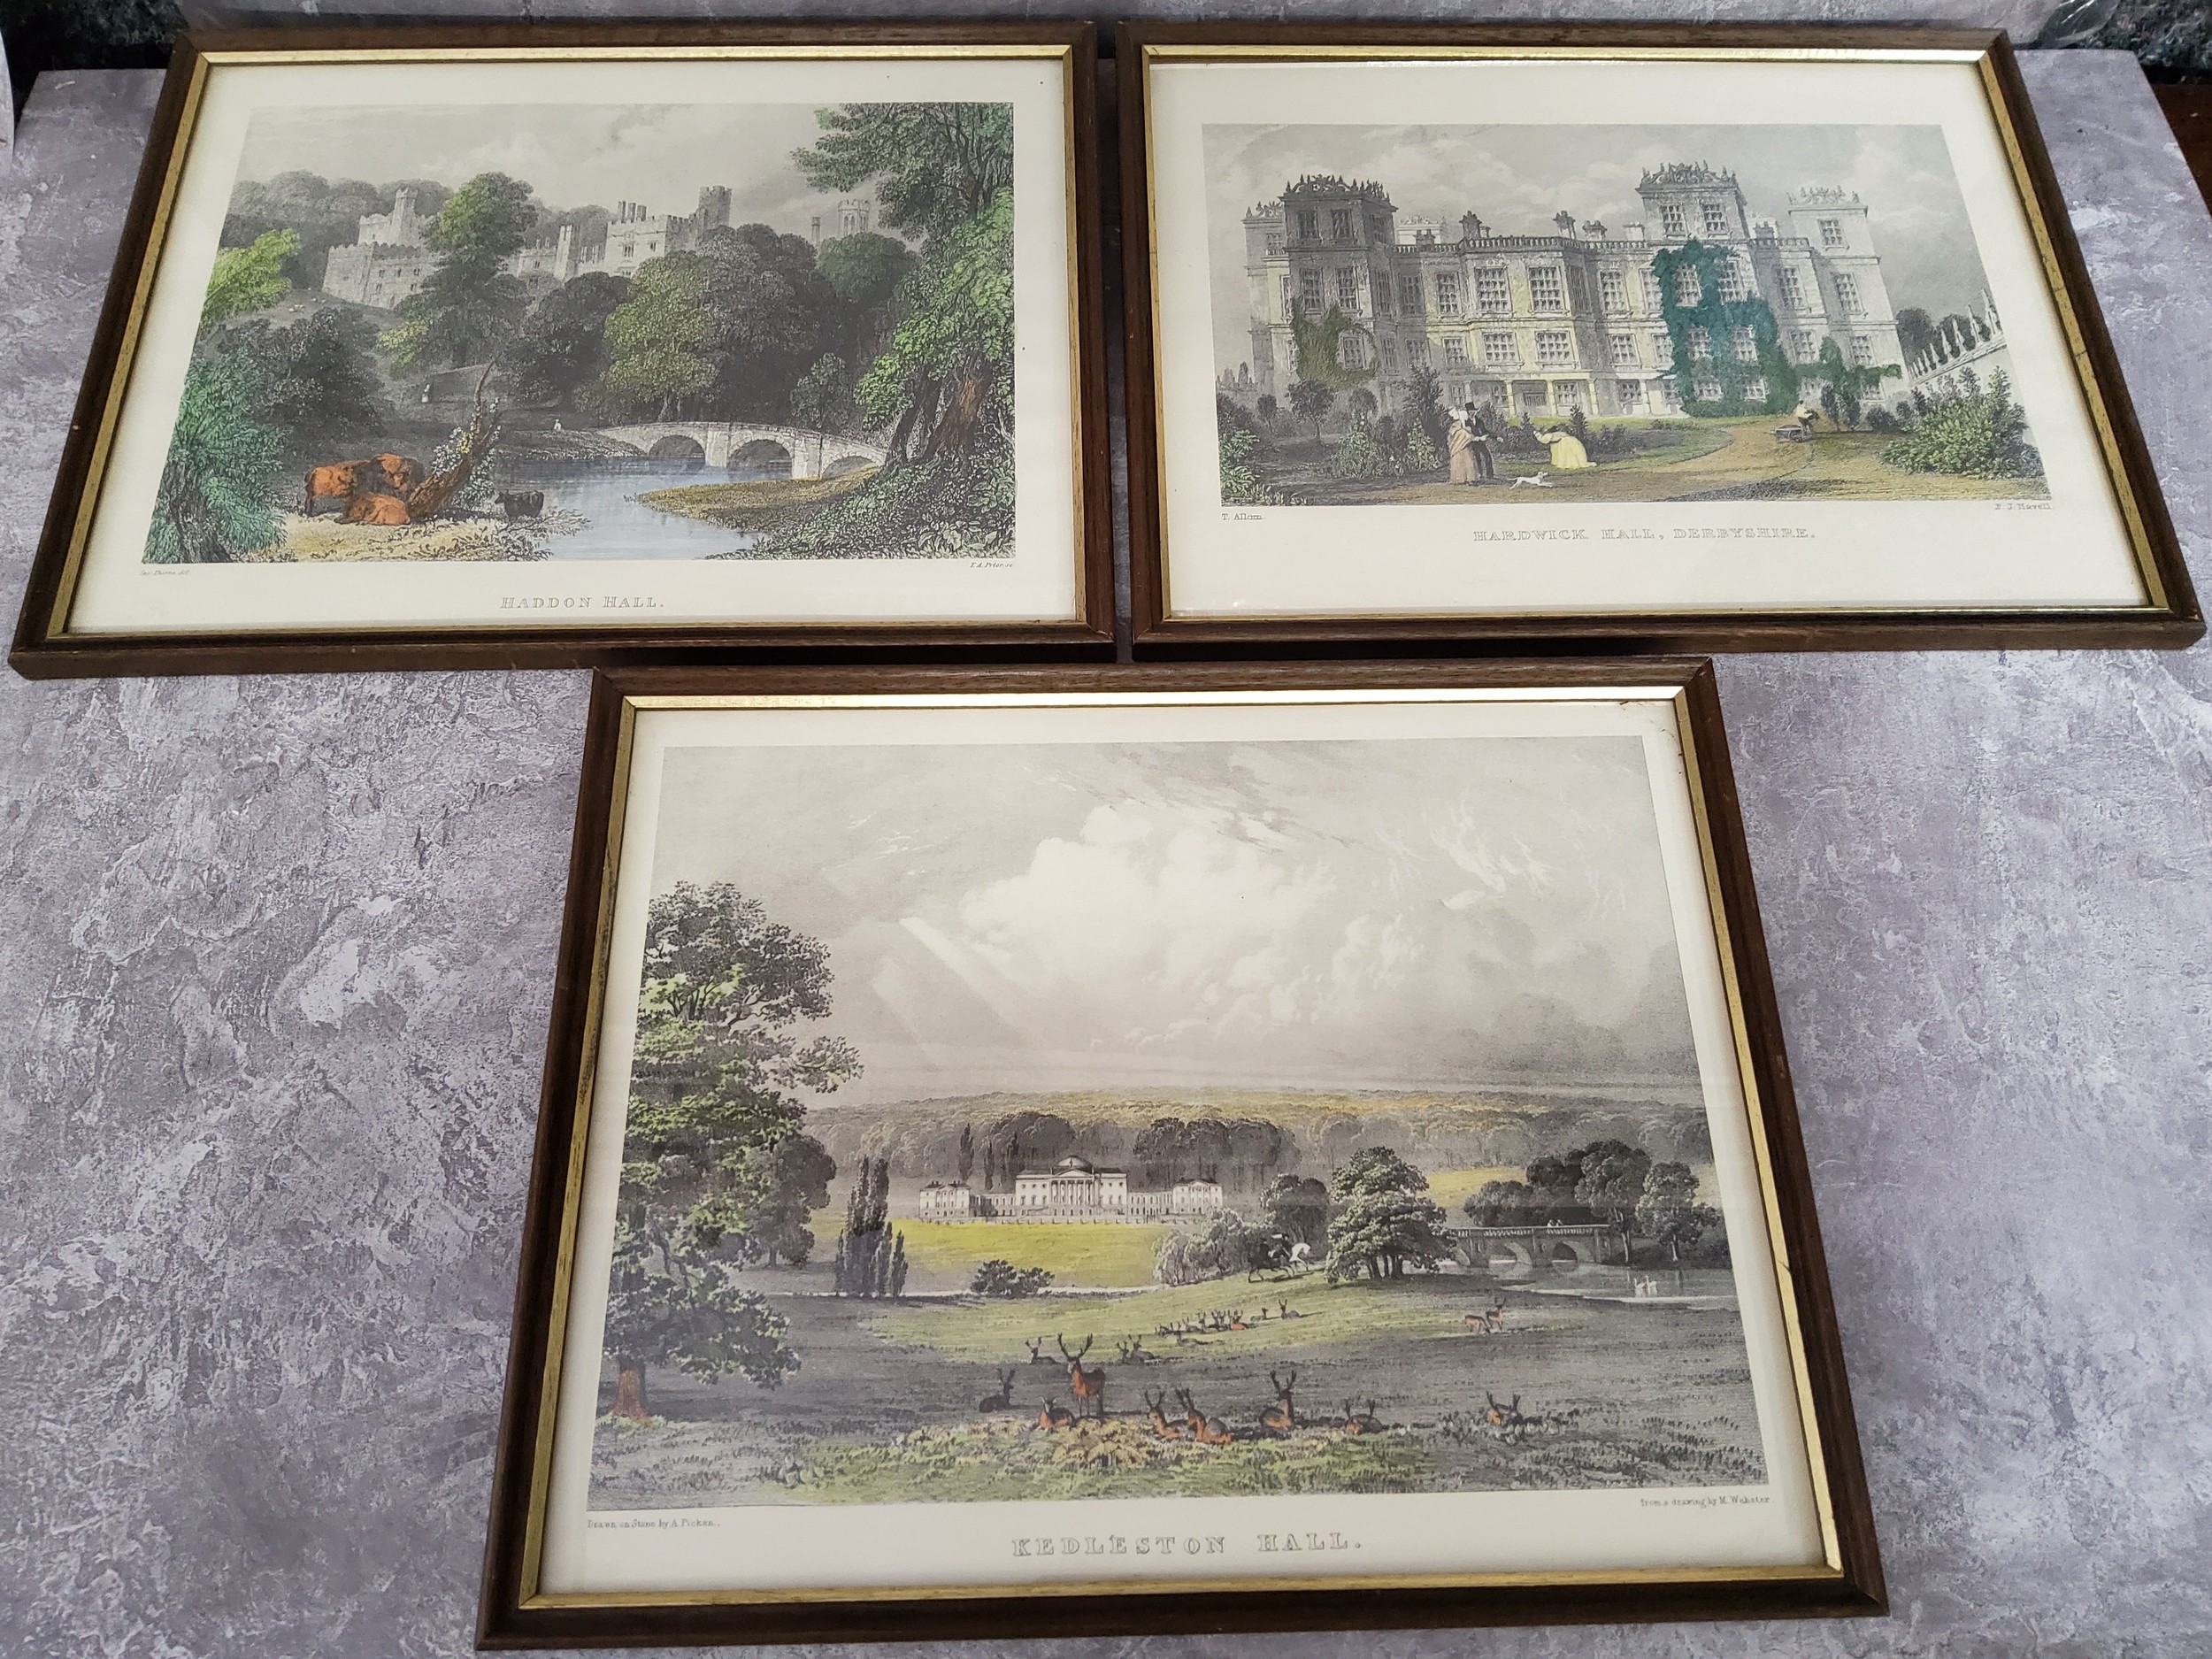 Six 19th century hand tinted lithographs of Derbyshire estates including Chatsworth House, - Image 3 of 4